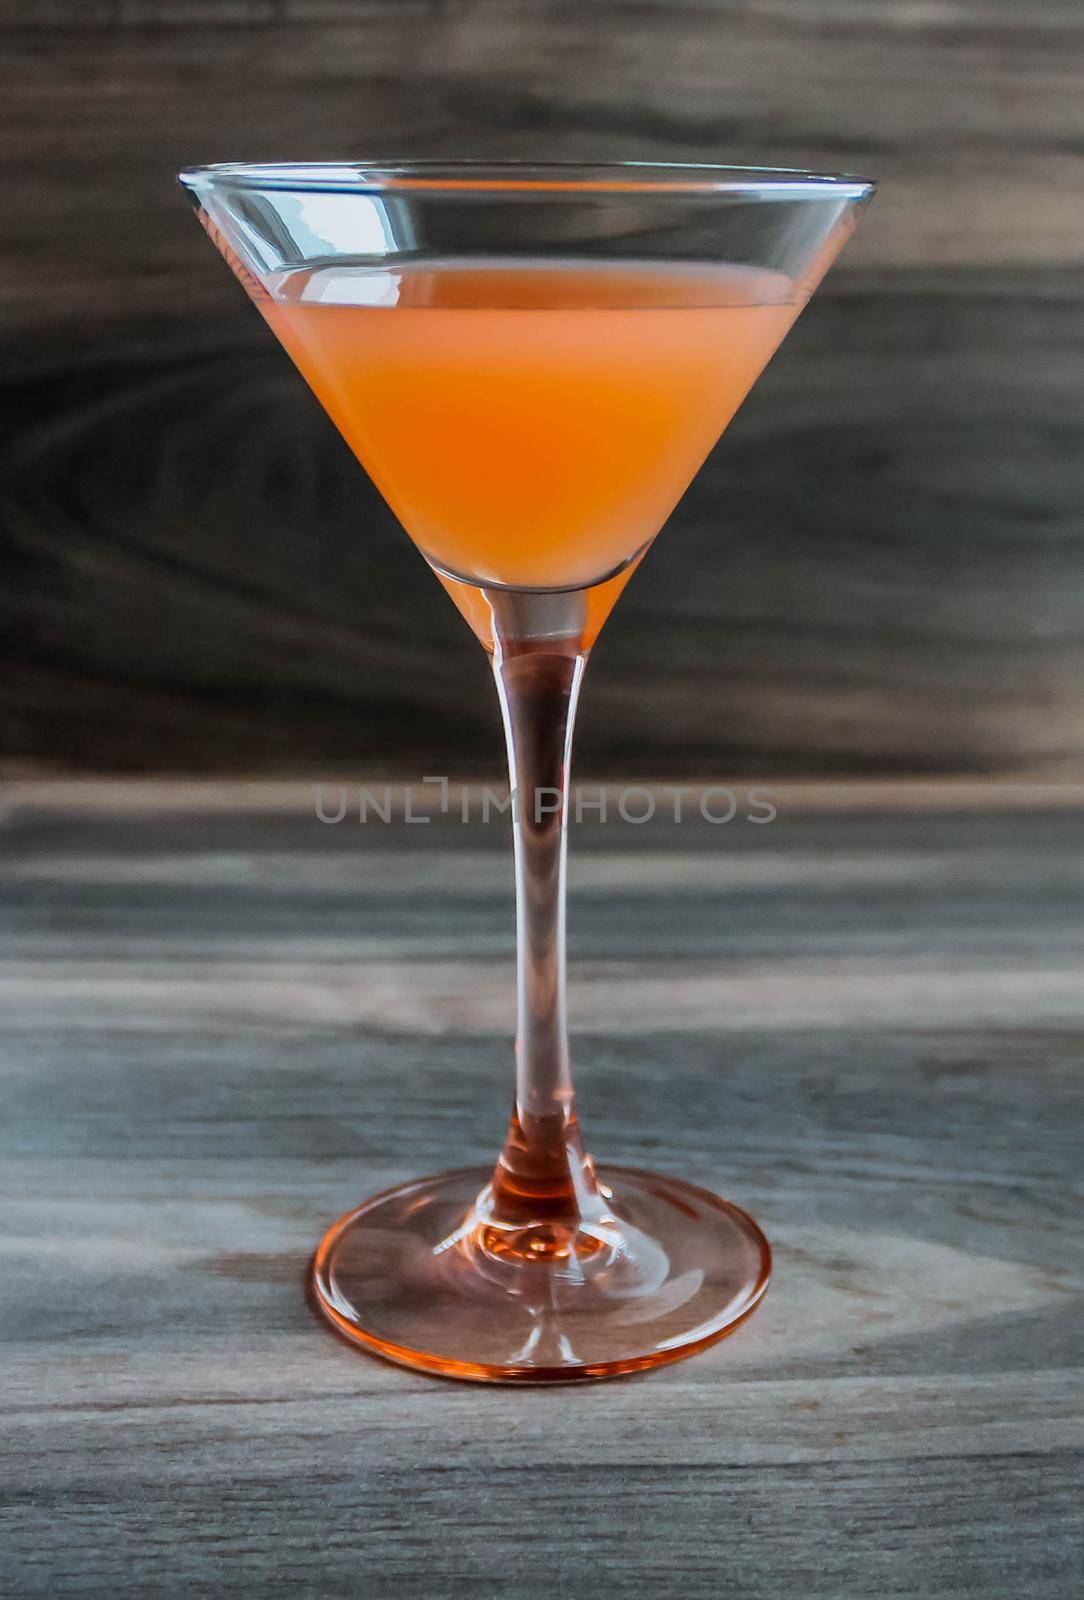 Martini glass of orange cocktail on a wooden table